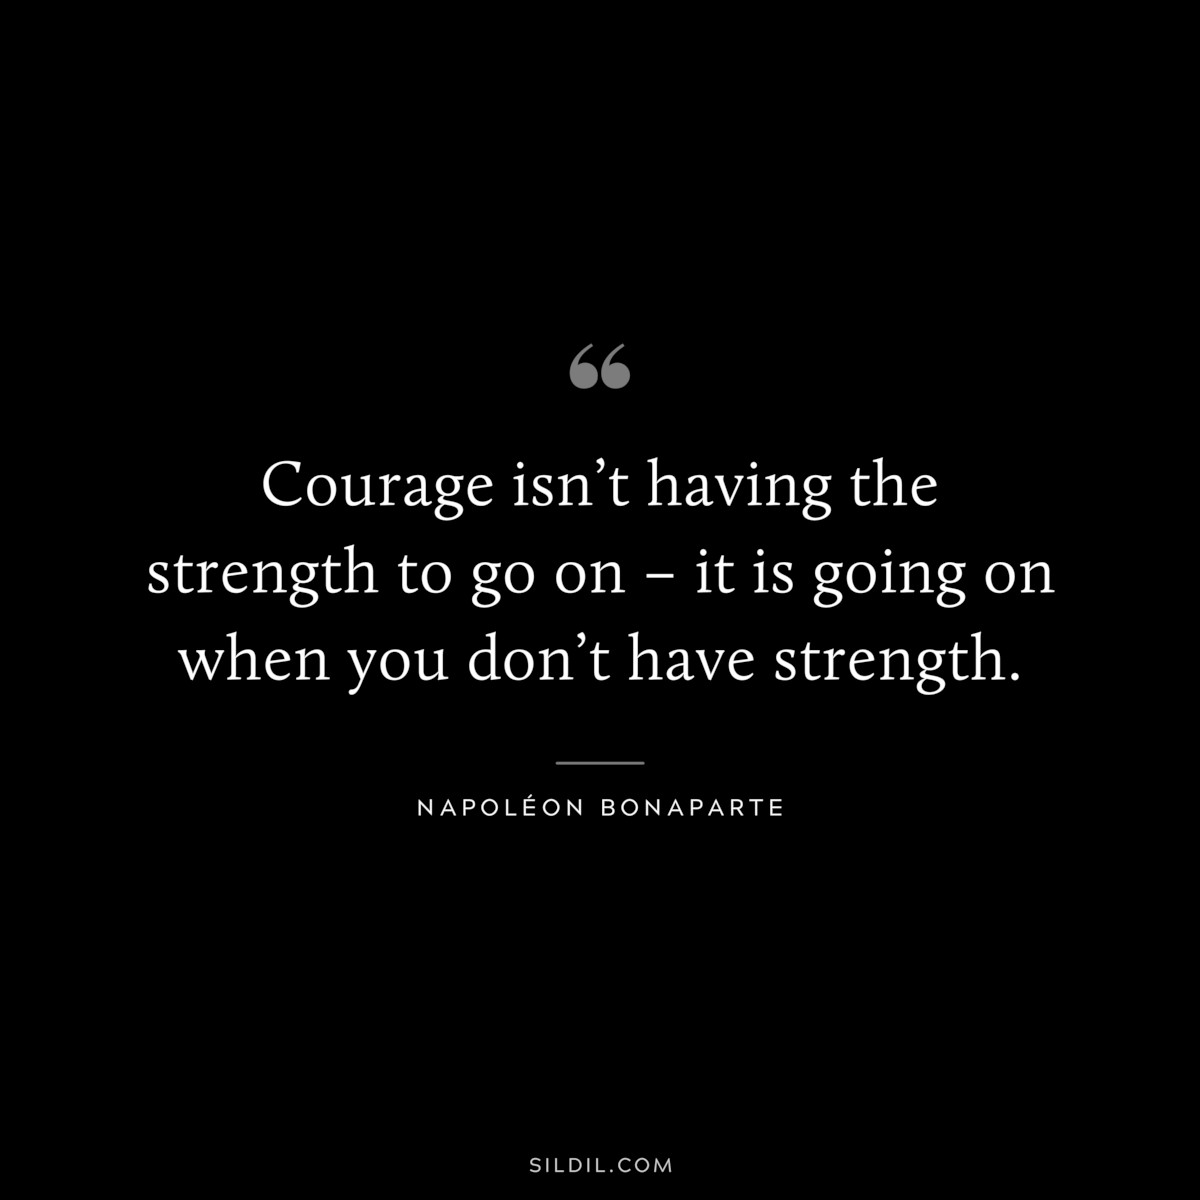 Courage isn’t having the strength to go on – it is going on when you don’t have strength. ― Napoléon Bonaparte